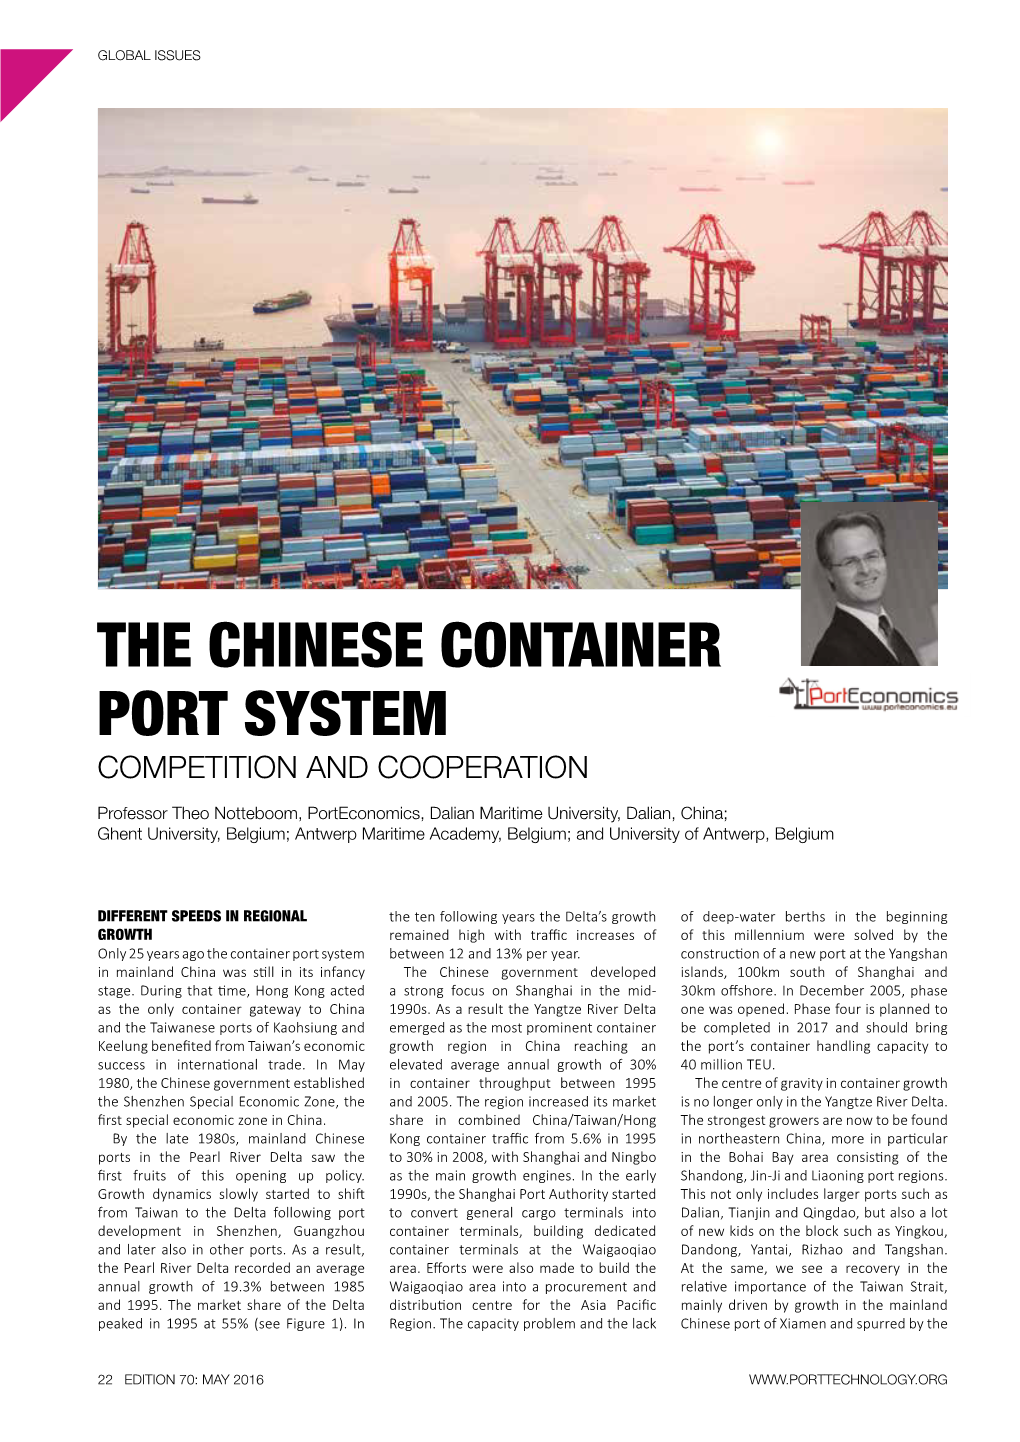 The Chinese Container Port System Competition and Cooperation